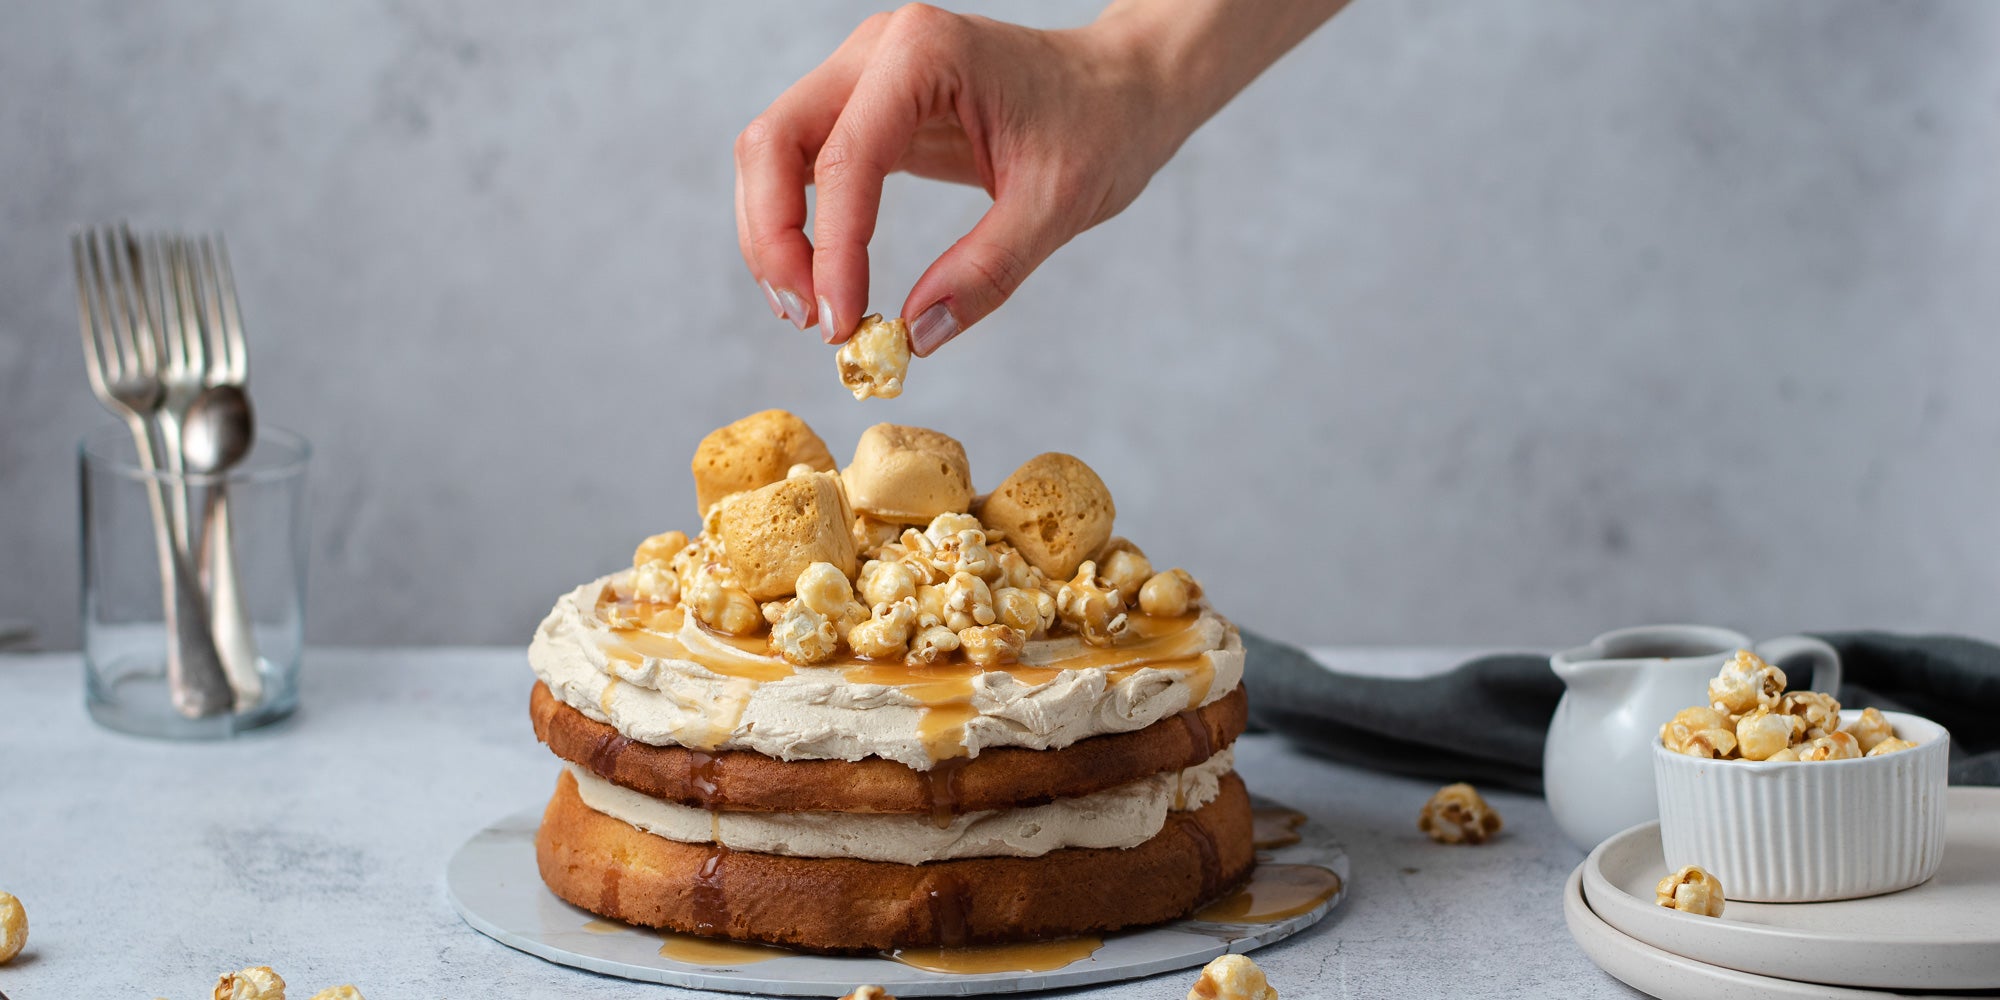 Caramel Cake topped with popcorn